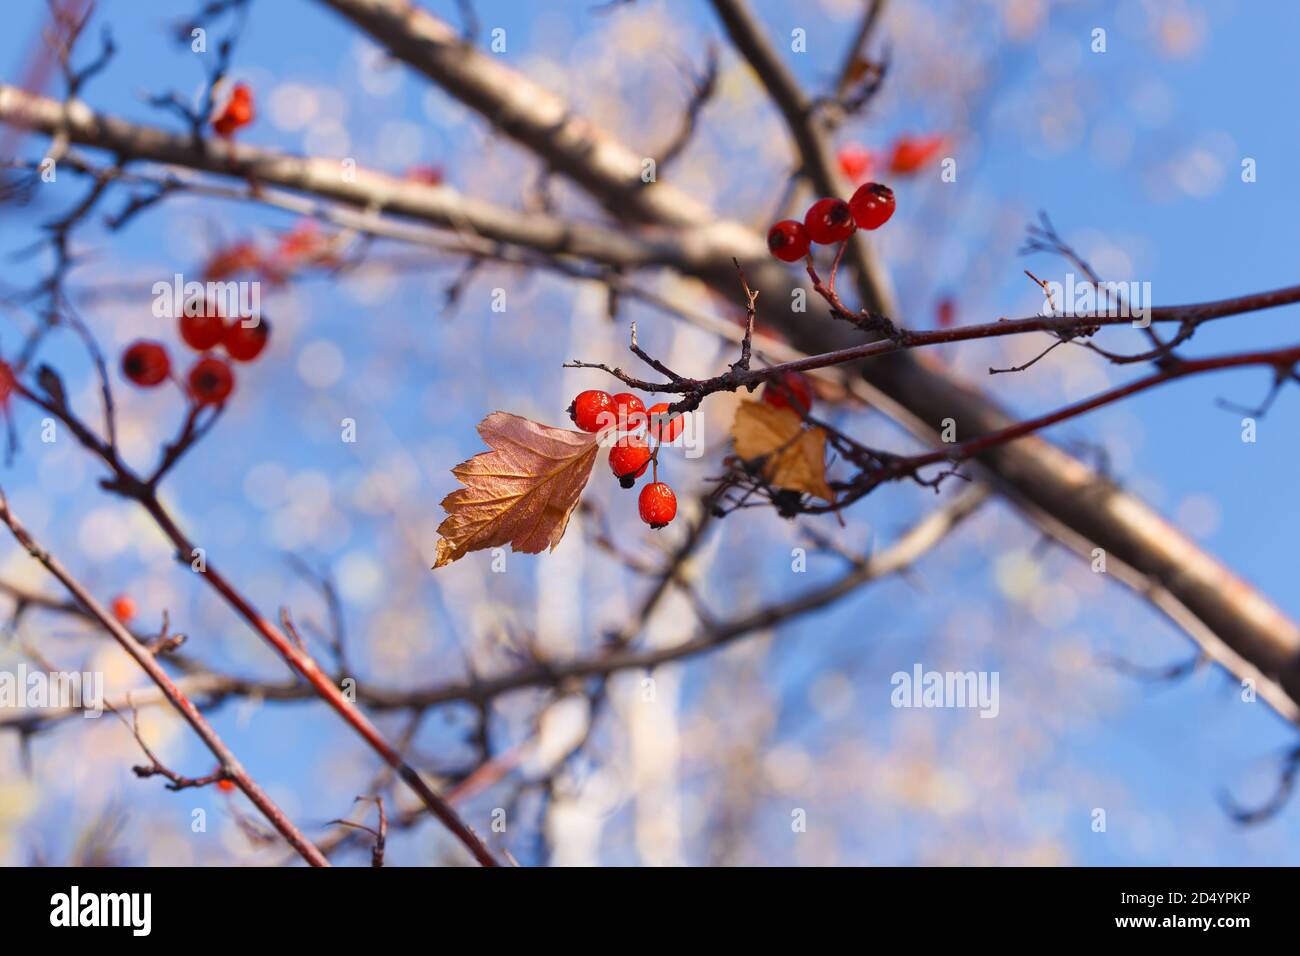 Hawthorn branches with berries on a blurred background of branches and blue sky Stock Photo